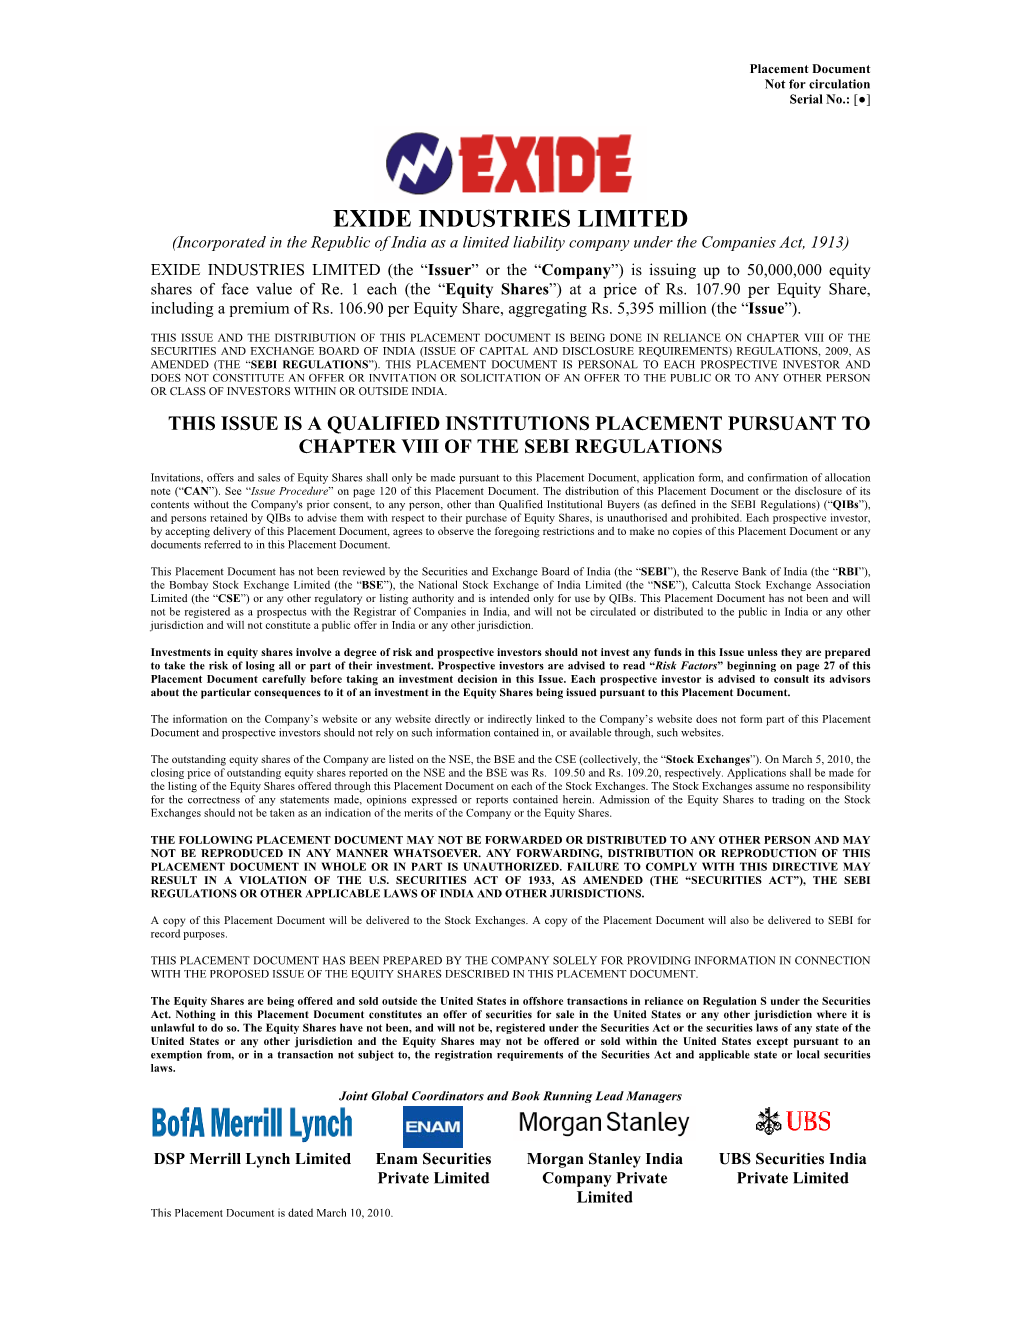 EXIDE INDUSTRIES LIMITED (Incorporated in the Republic of India As a Limited Liability Company Under the Companies Act, 1913)